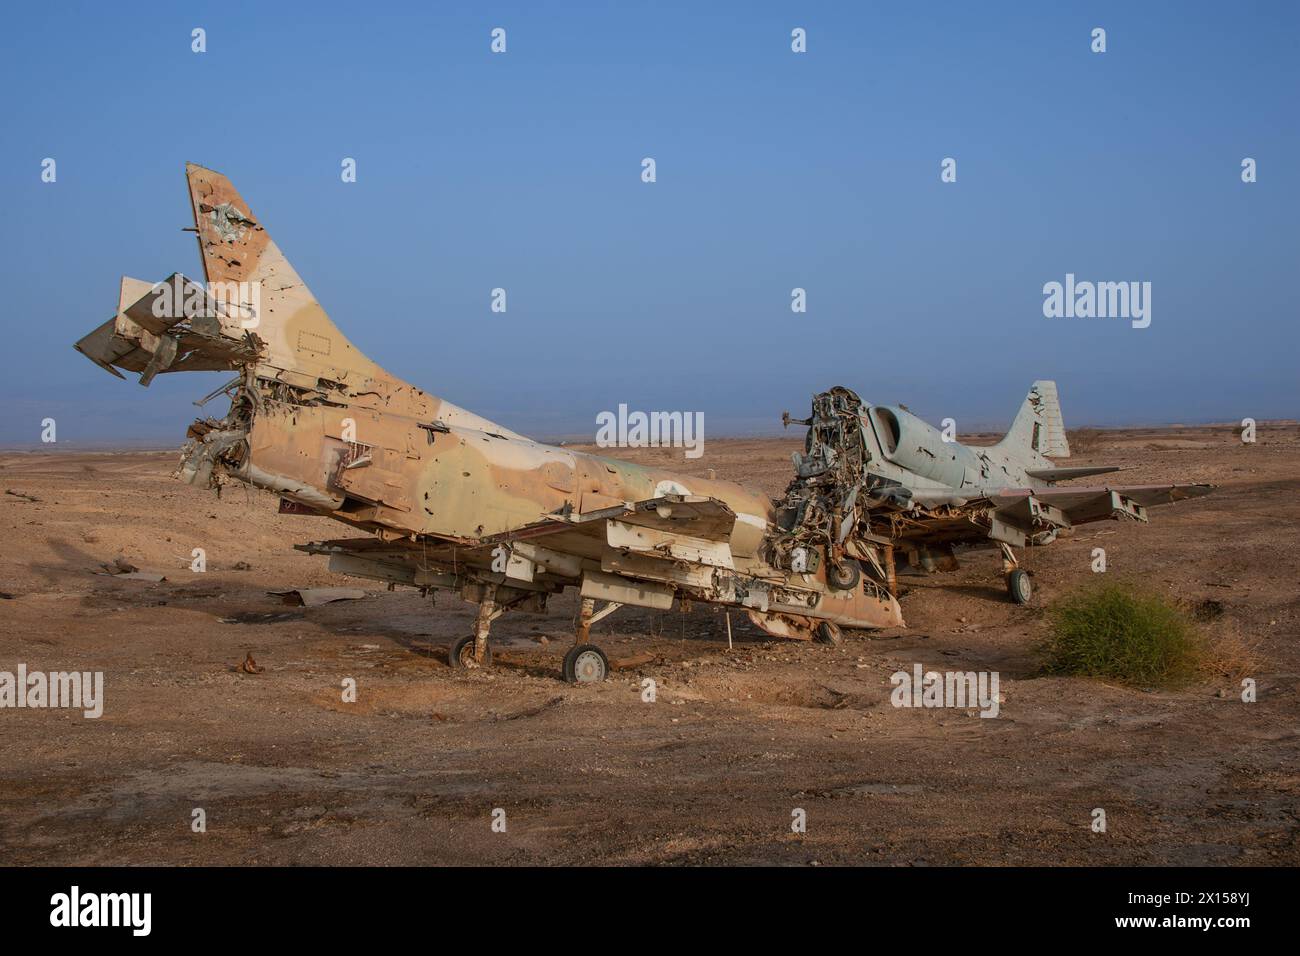 Destroyed fighter planes in the Negev desert Israel Stock Photo